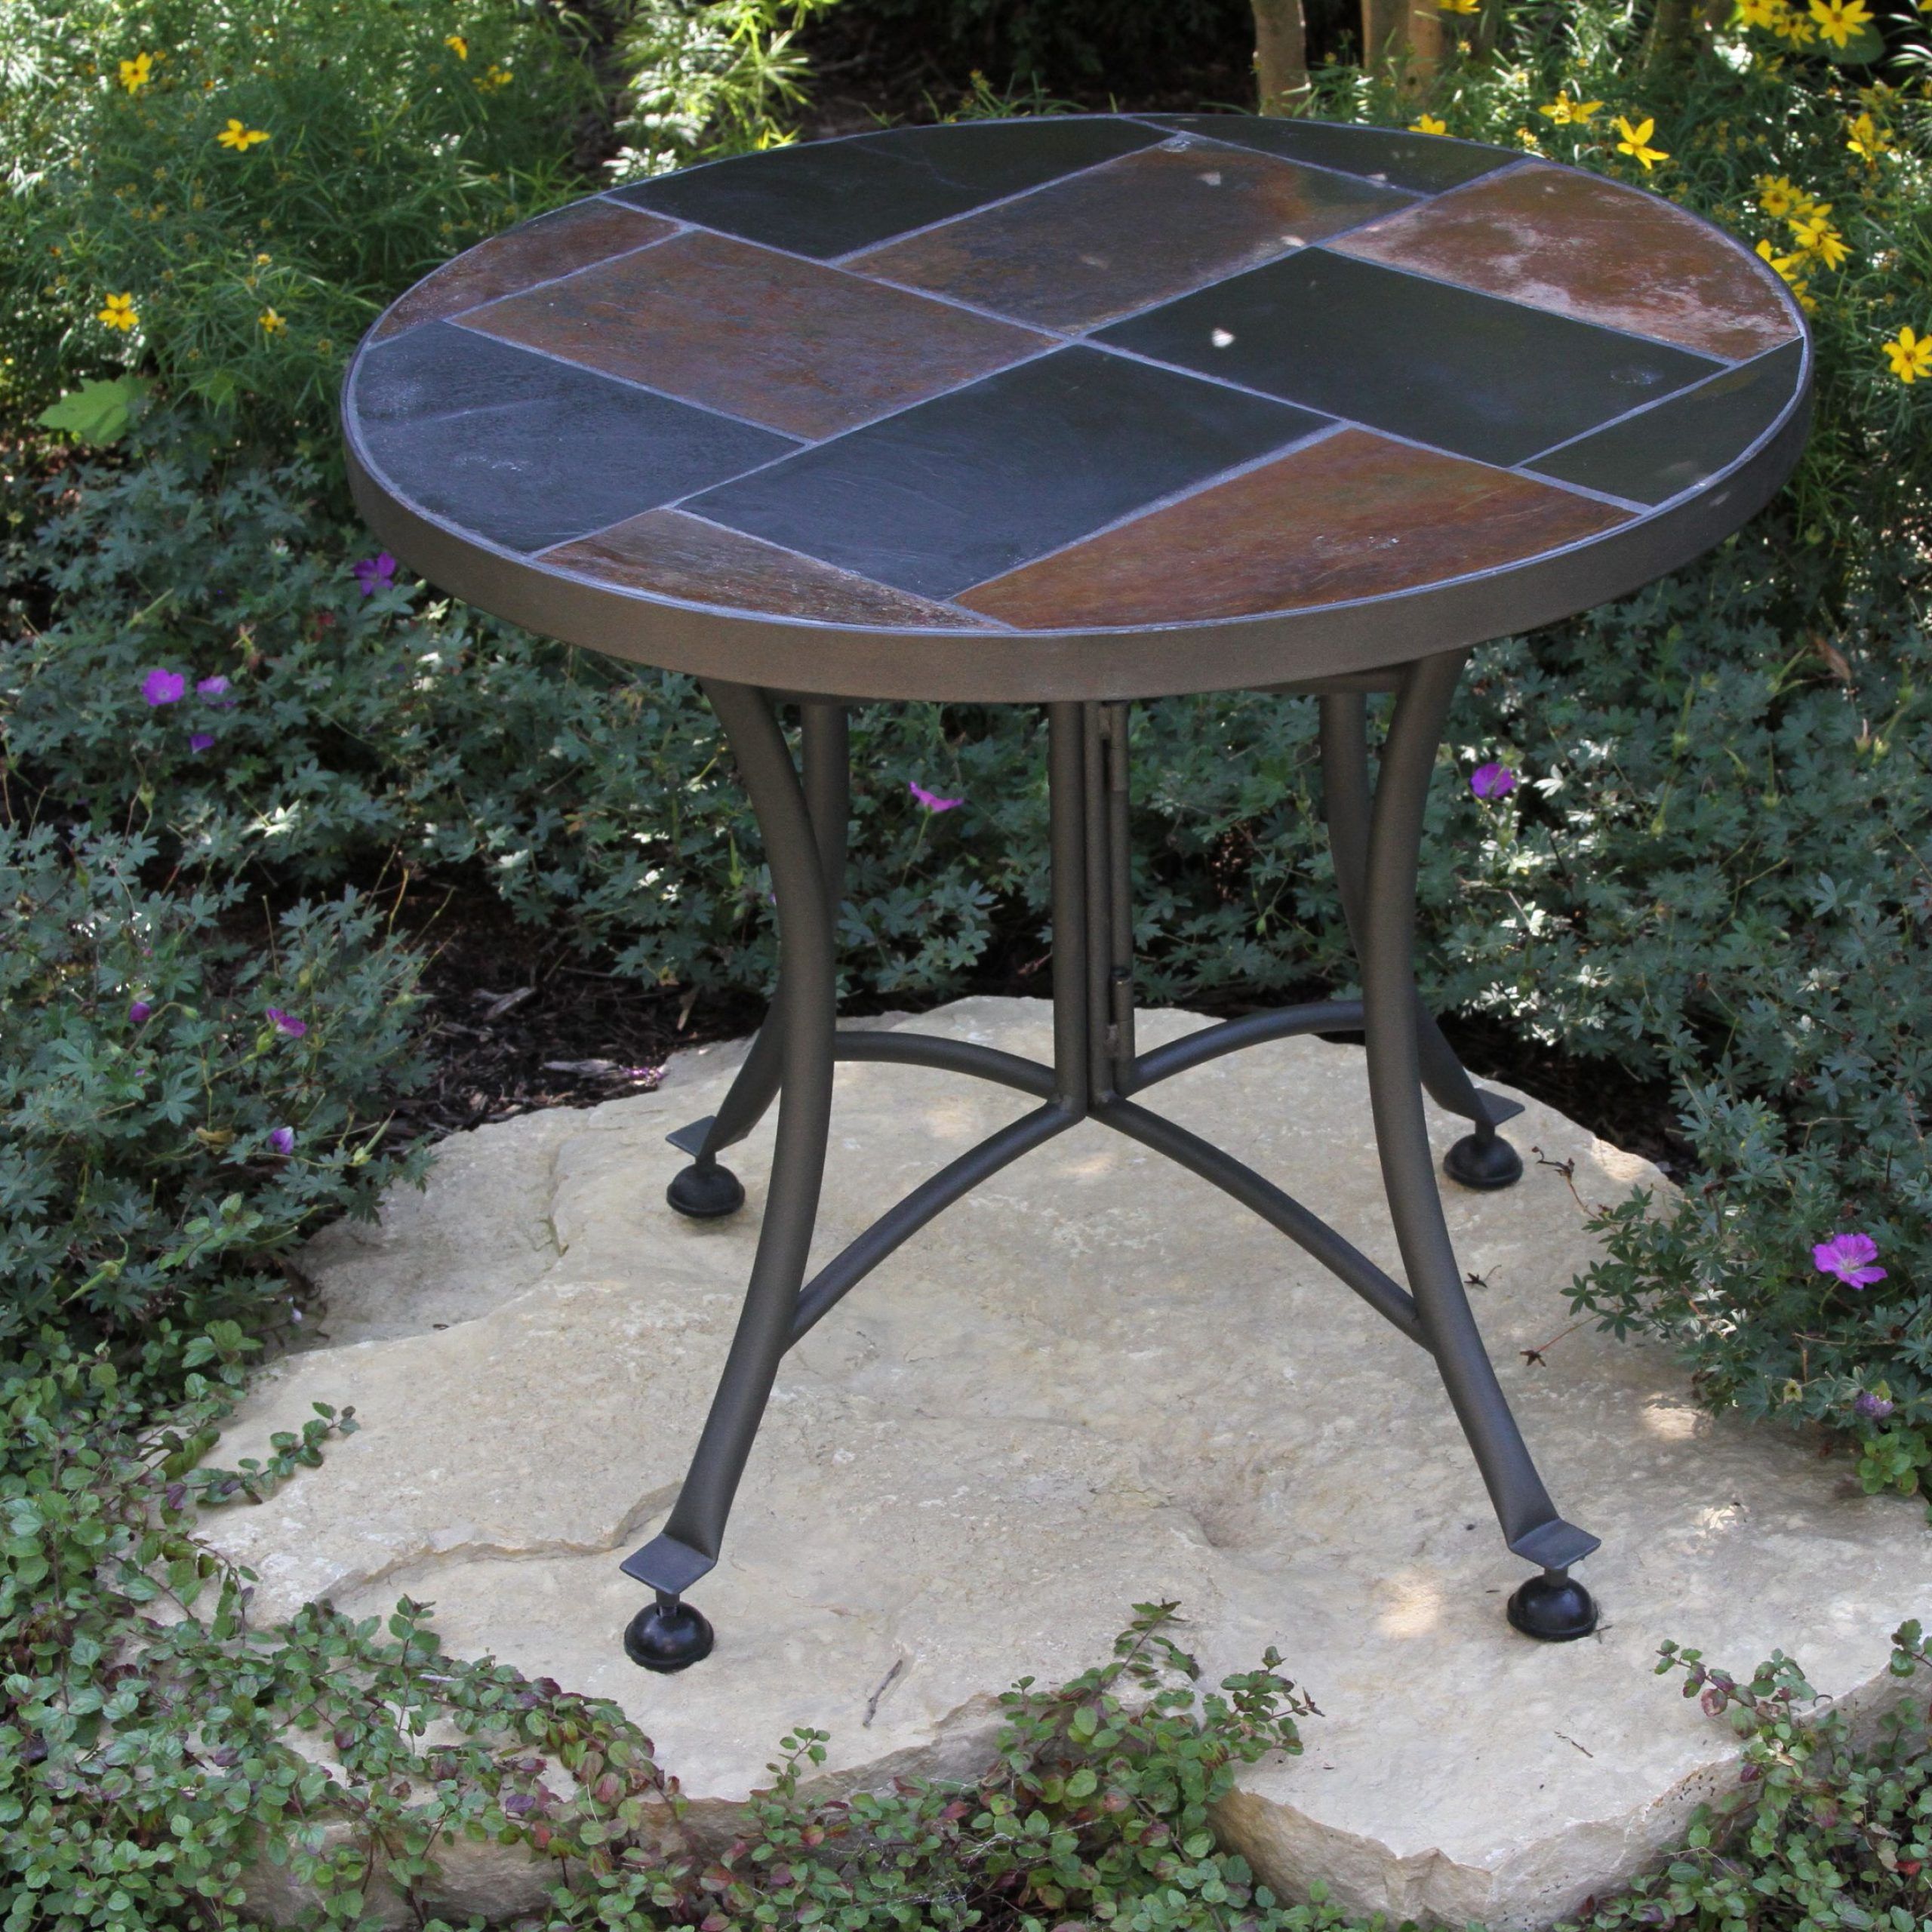 24" Stone Slate Mosaic Cobble Accent Table (View 13 of 15)